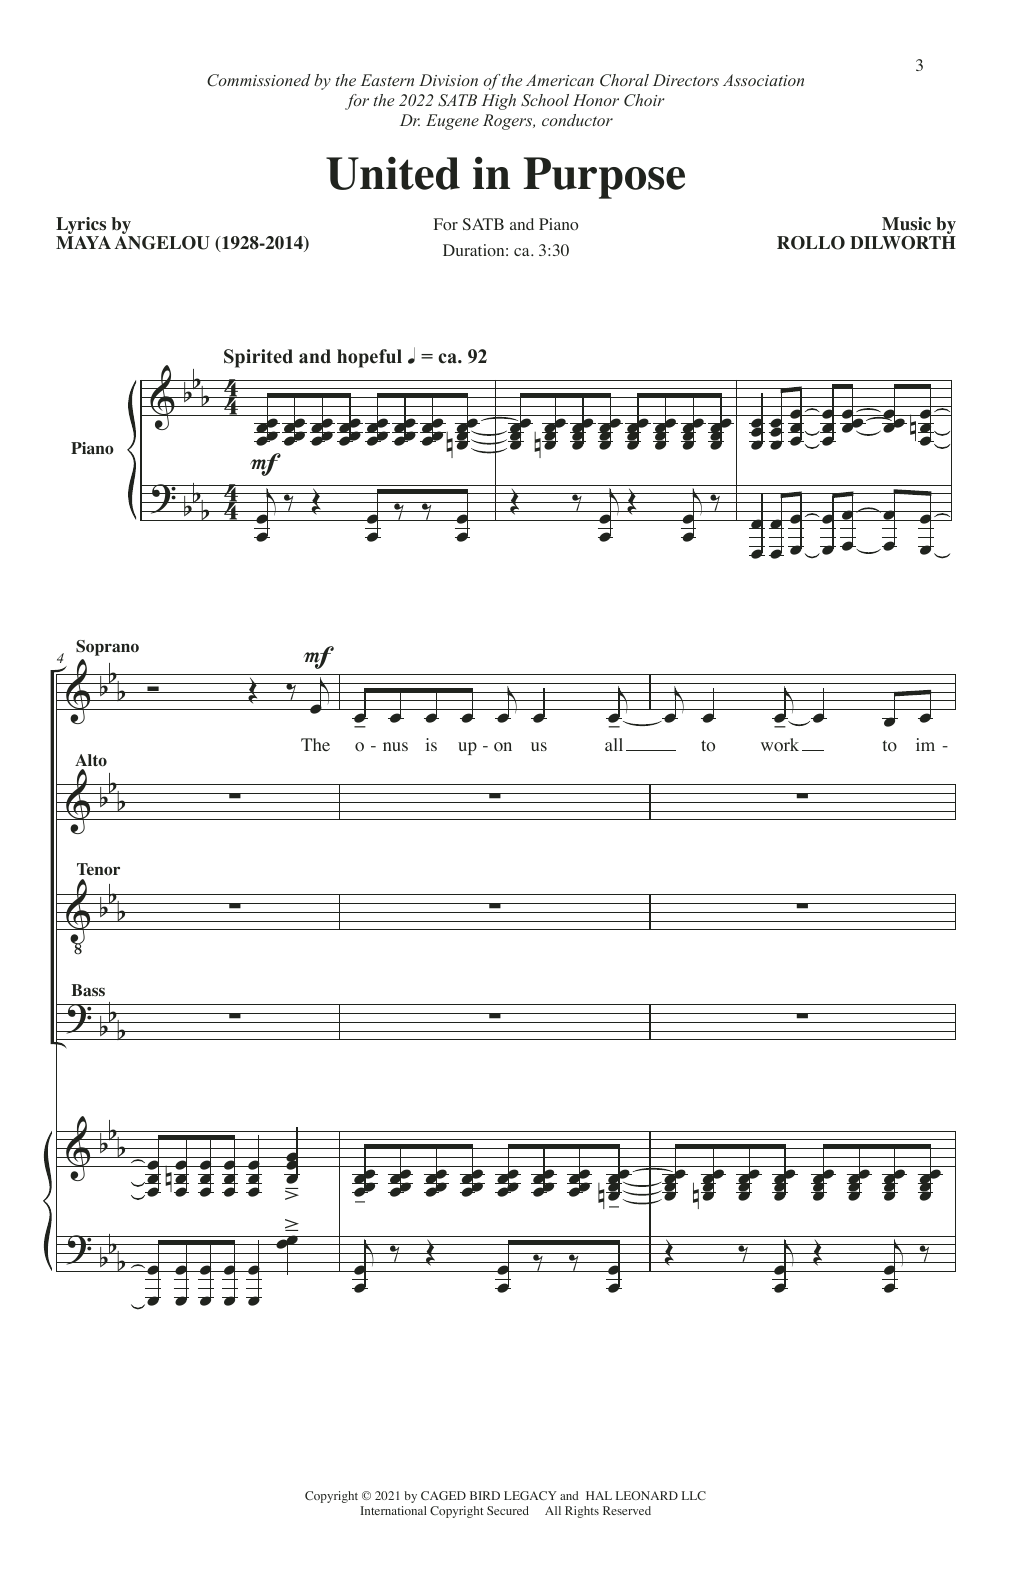 Download Maya Angelou and Rollo Dilworth United In Purpose Sheet Music